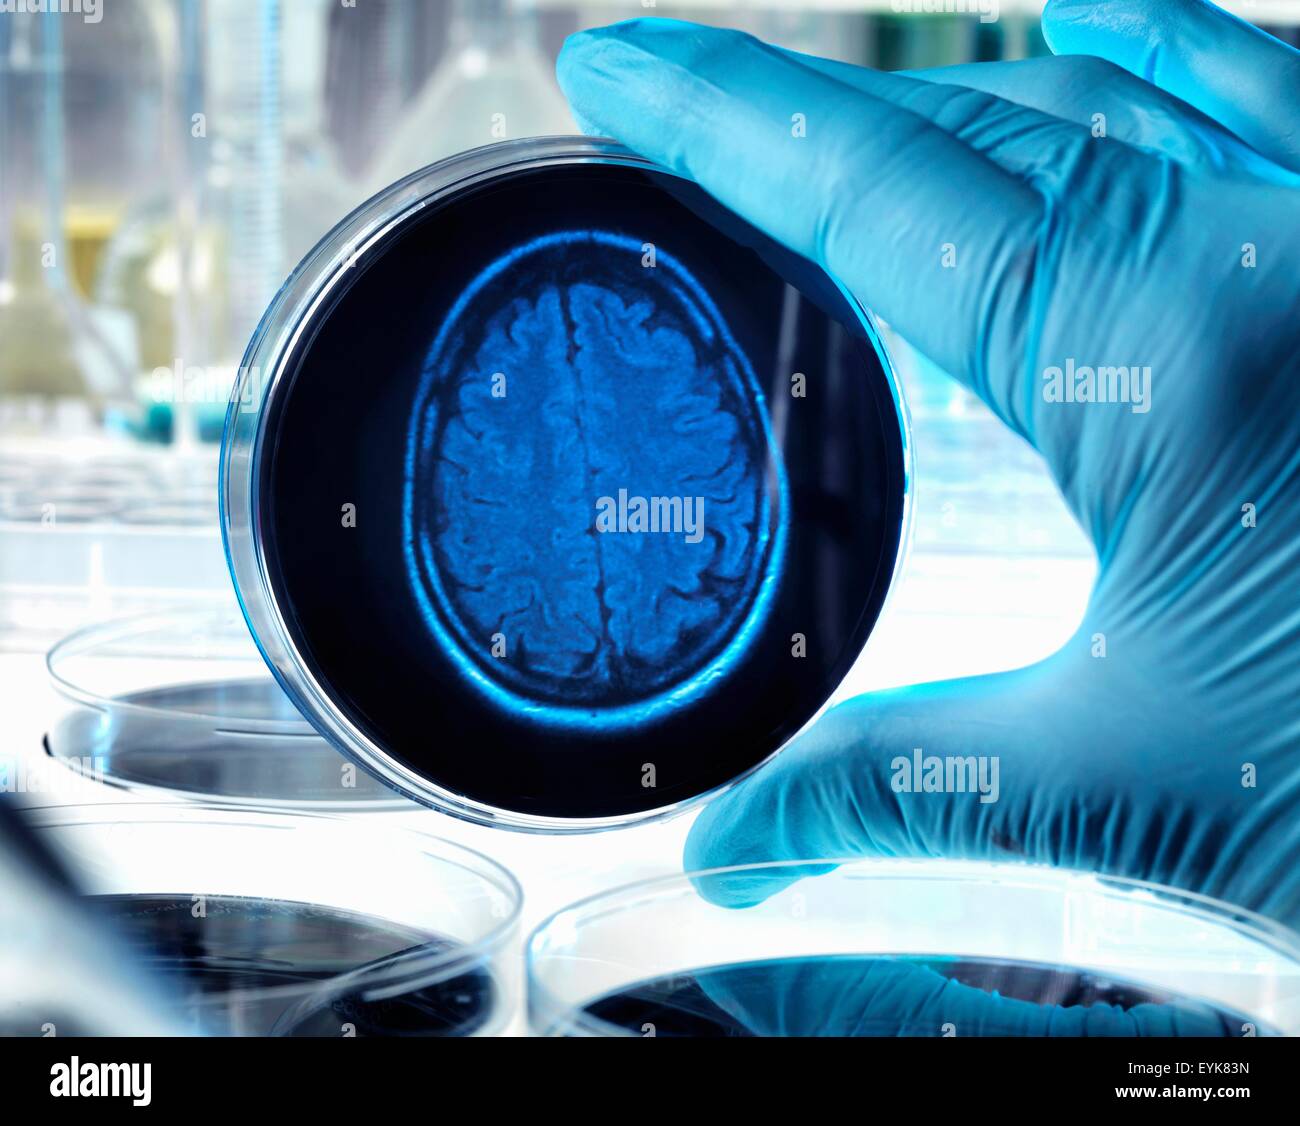 Scientist holding a petri dish with a brain scan illustrating research into dementia, alzheimers and other brain disorders. Stock Photo